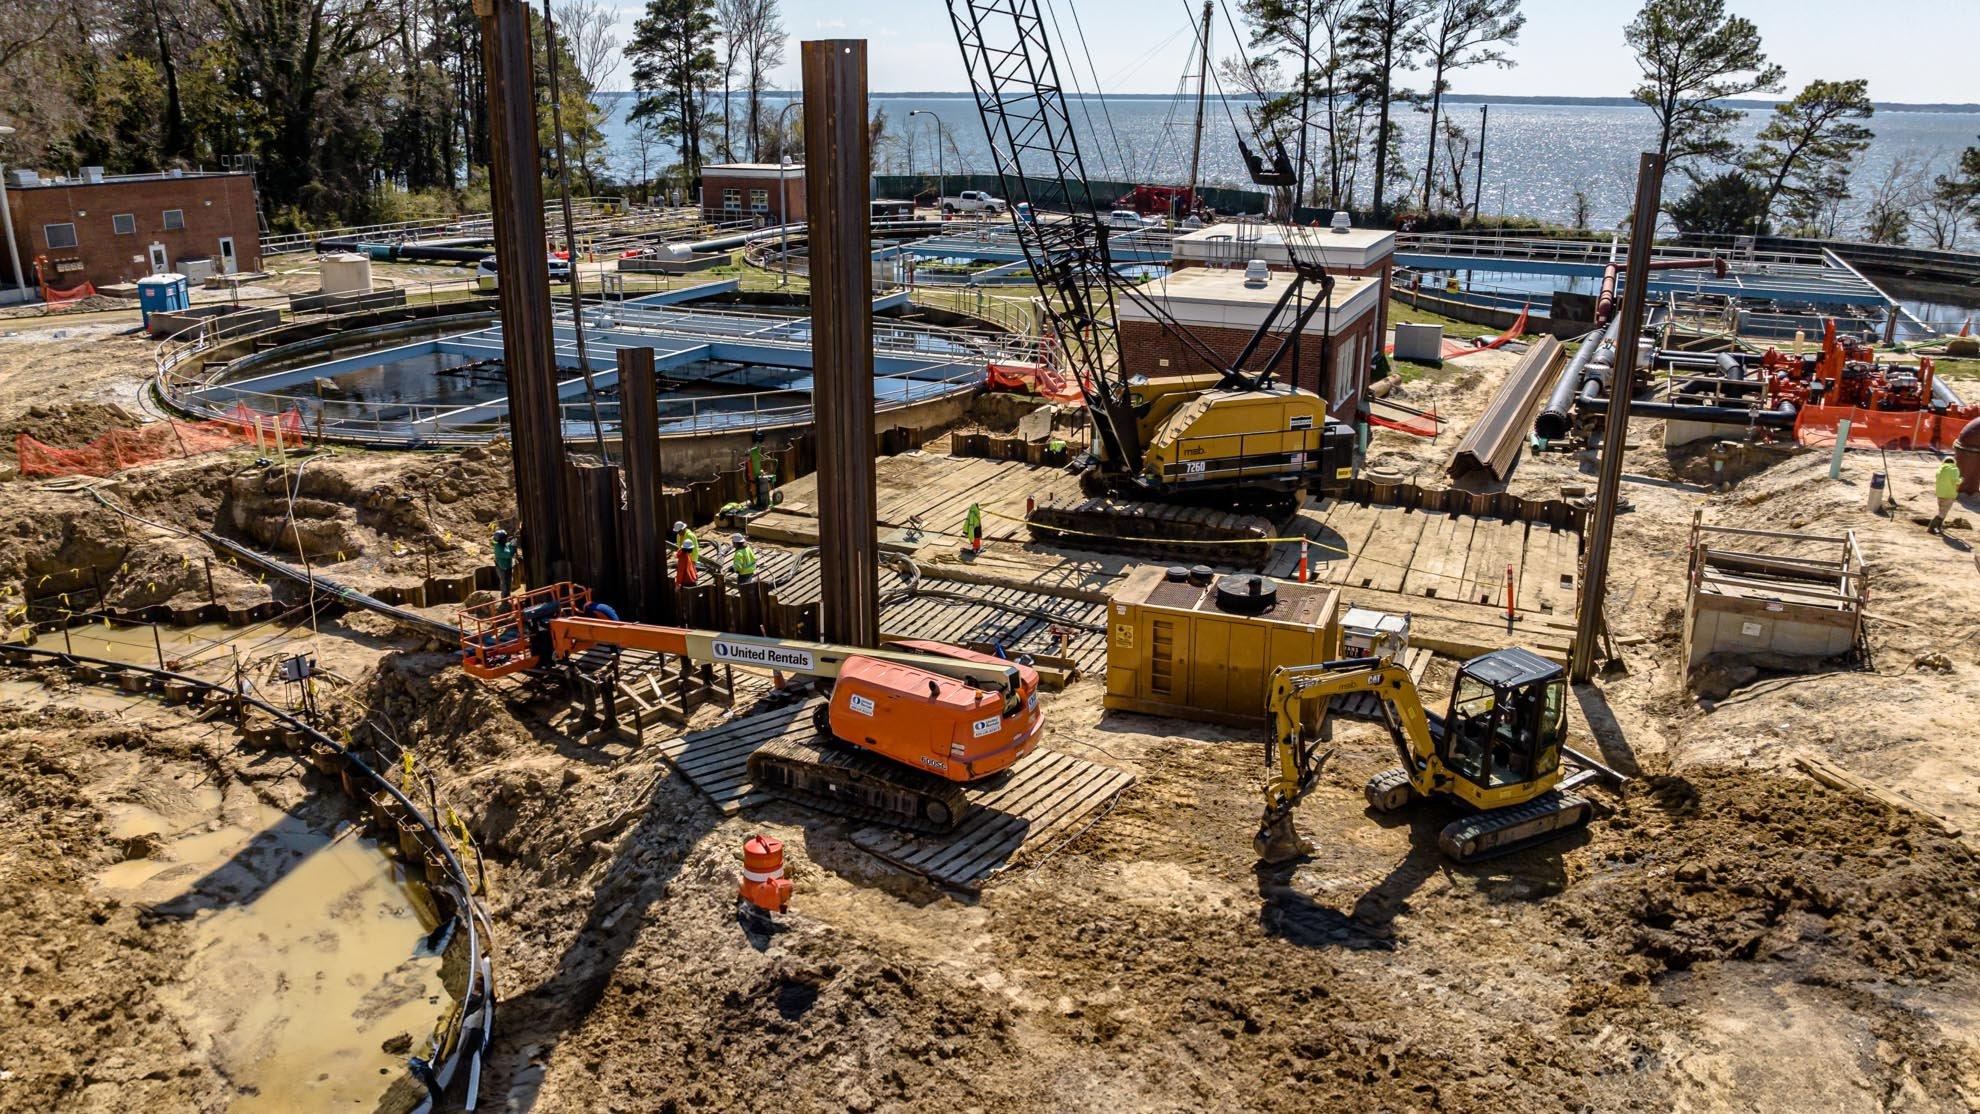 Construction site of a water treatment plant, with excavators, cranes and front-end loaders, next to a lake.